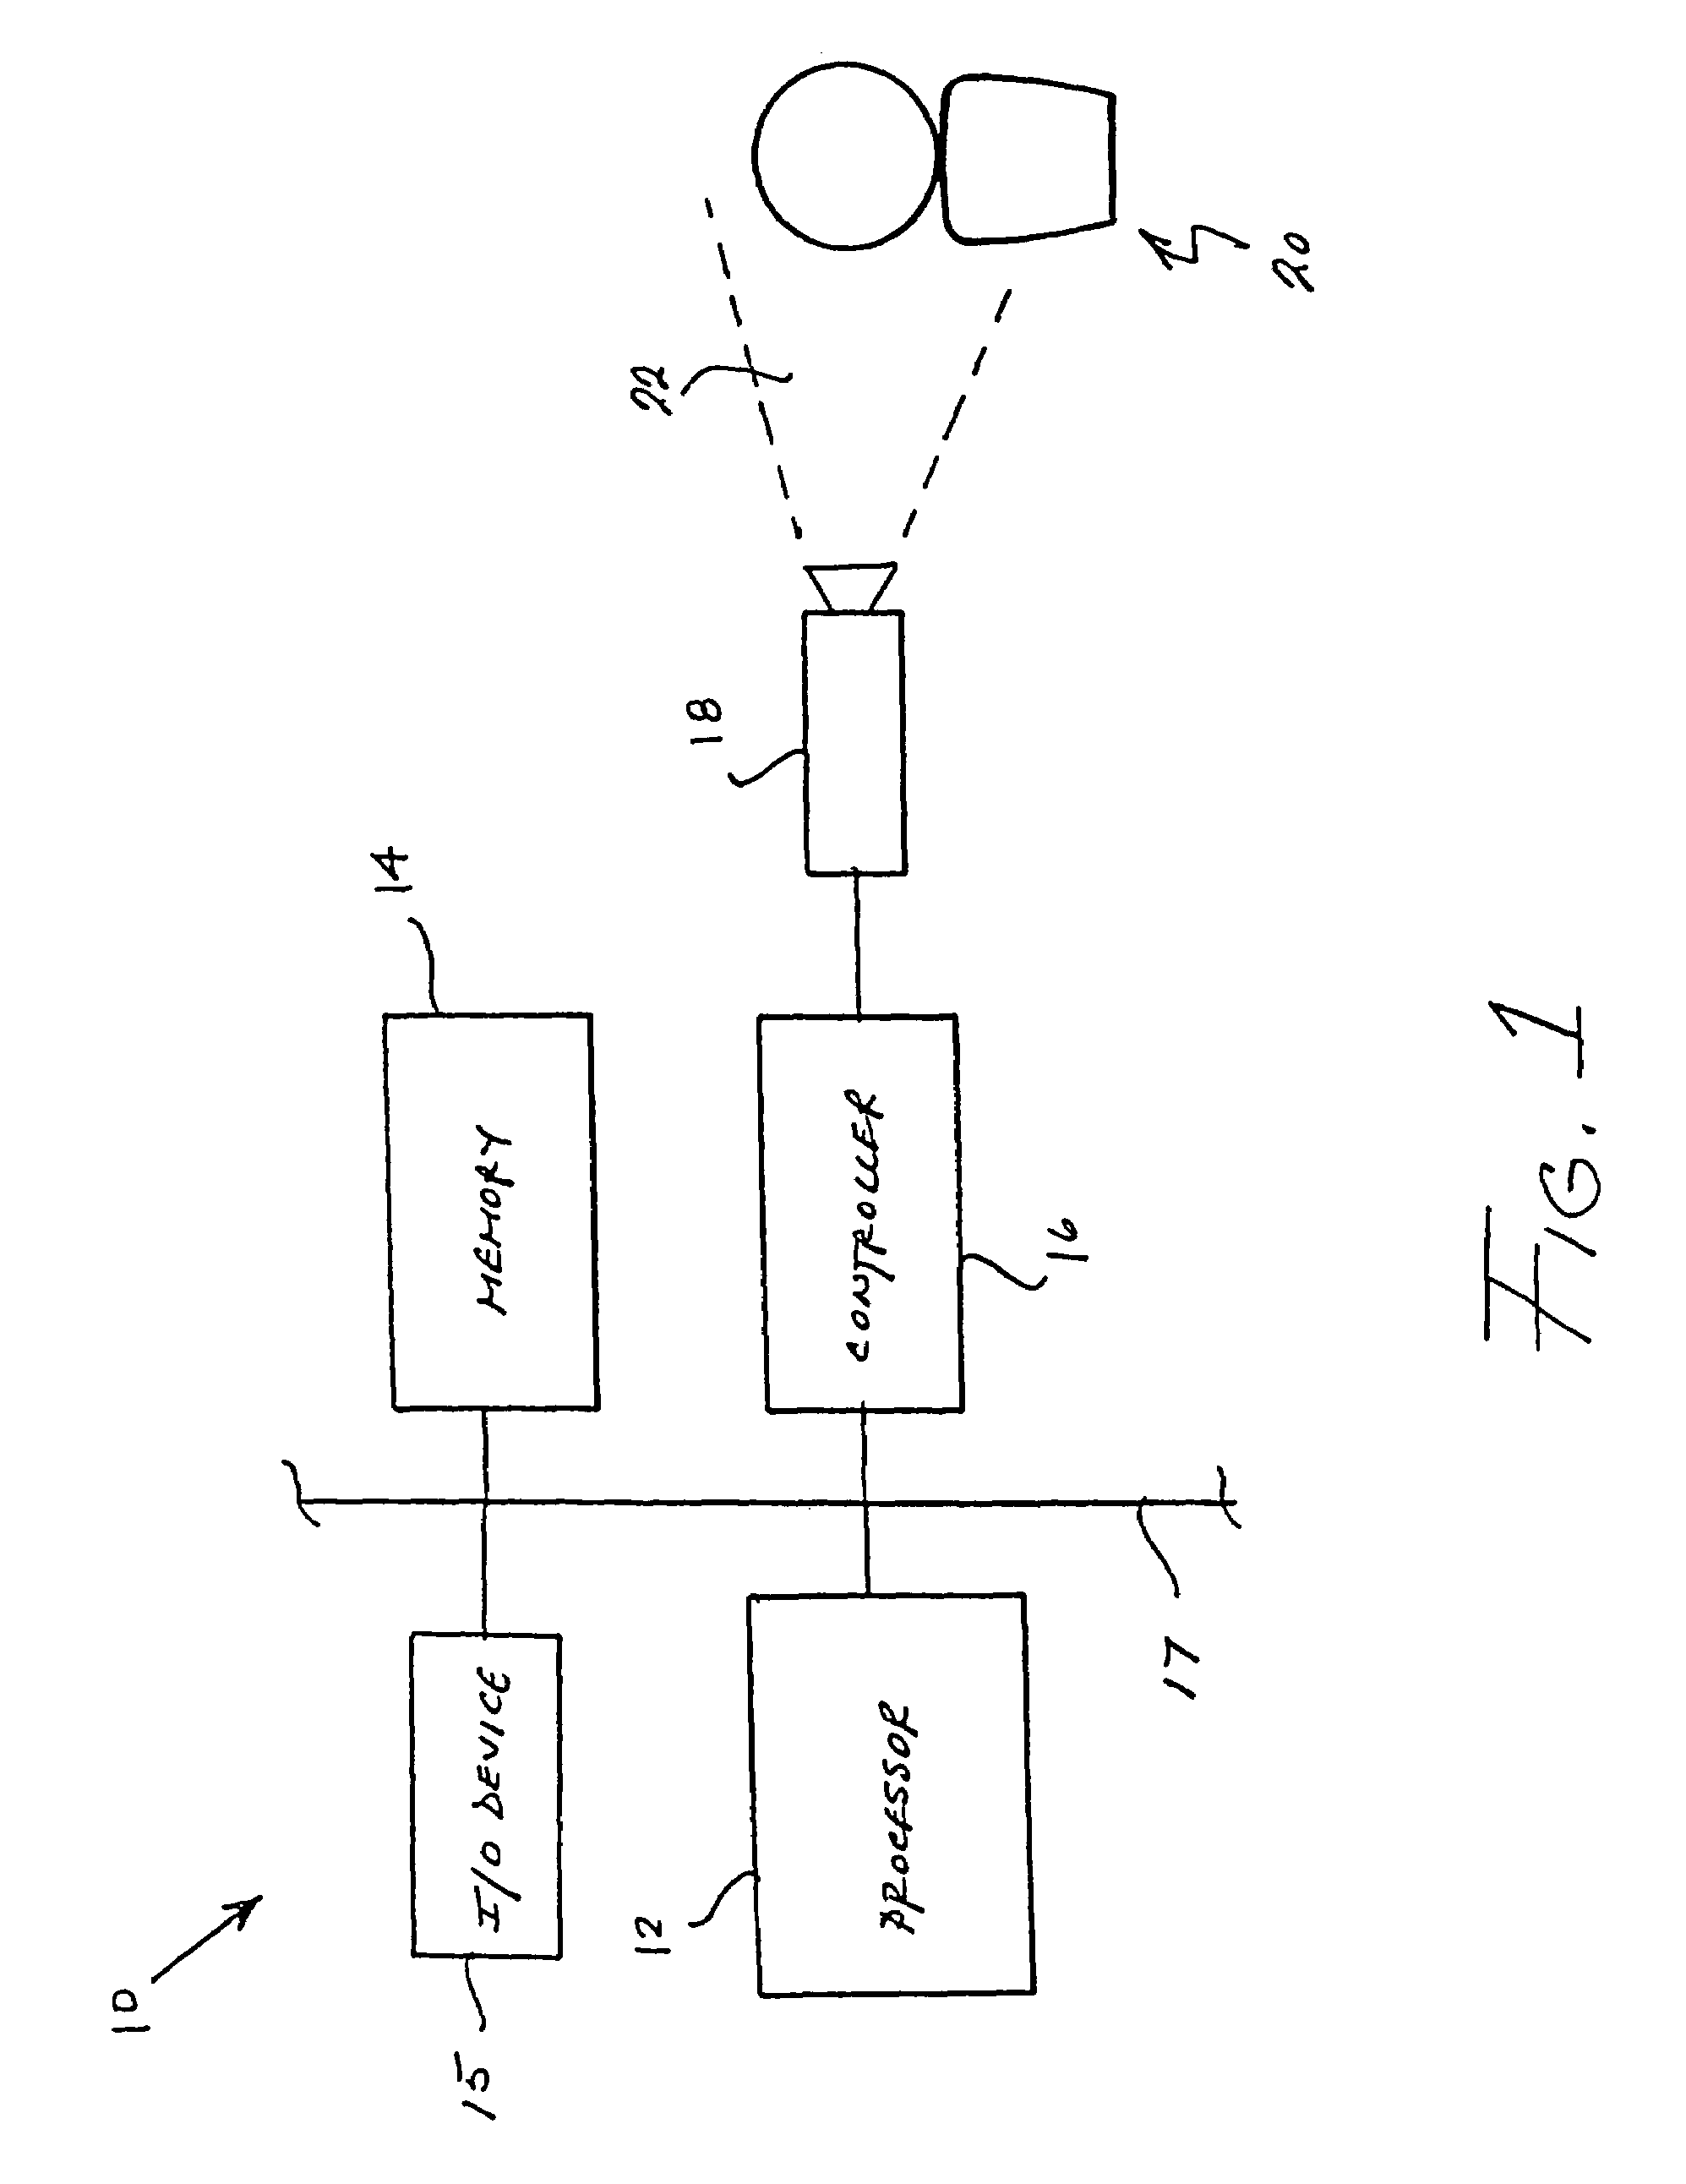 Person tagging in an image processing system utilizing a statistical model based on both appearance and geometric features